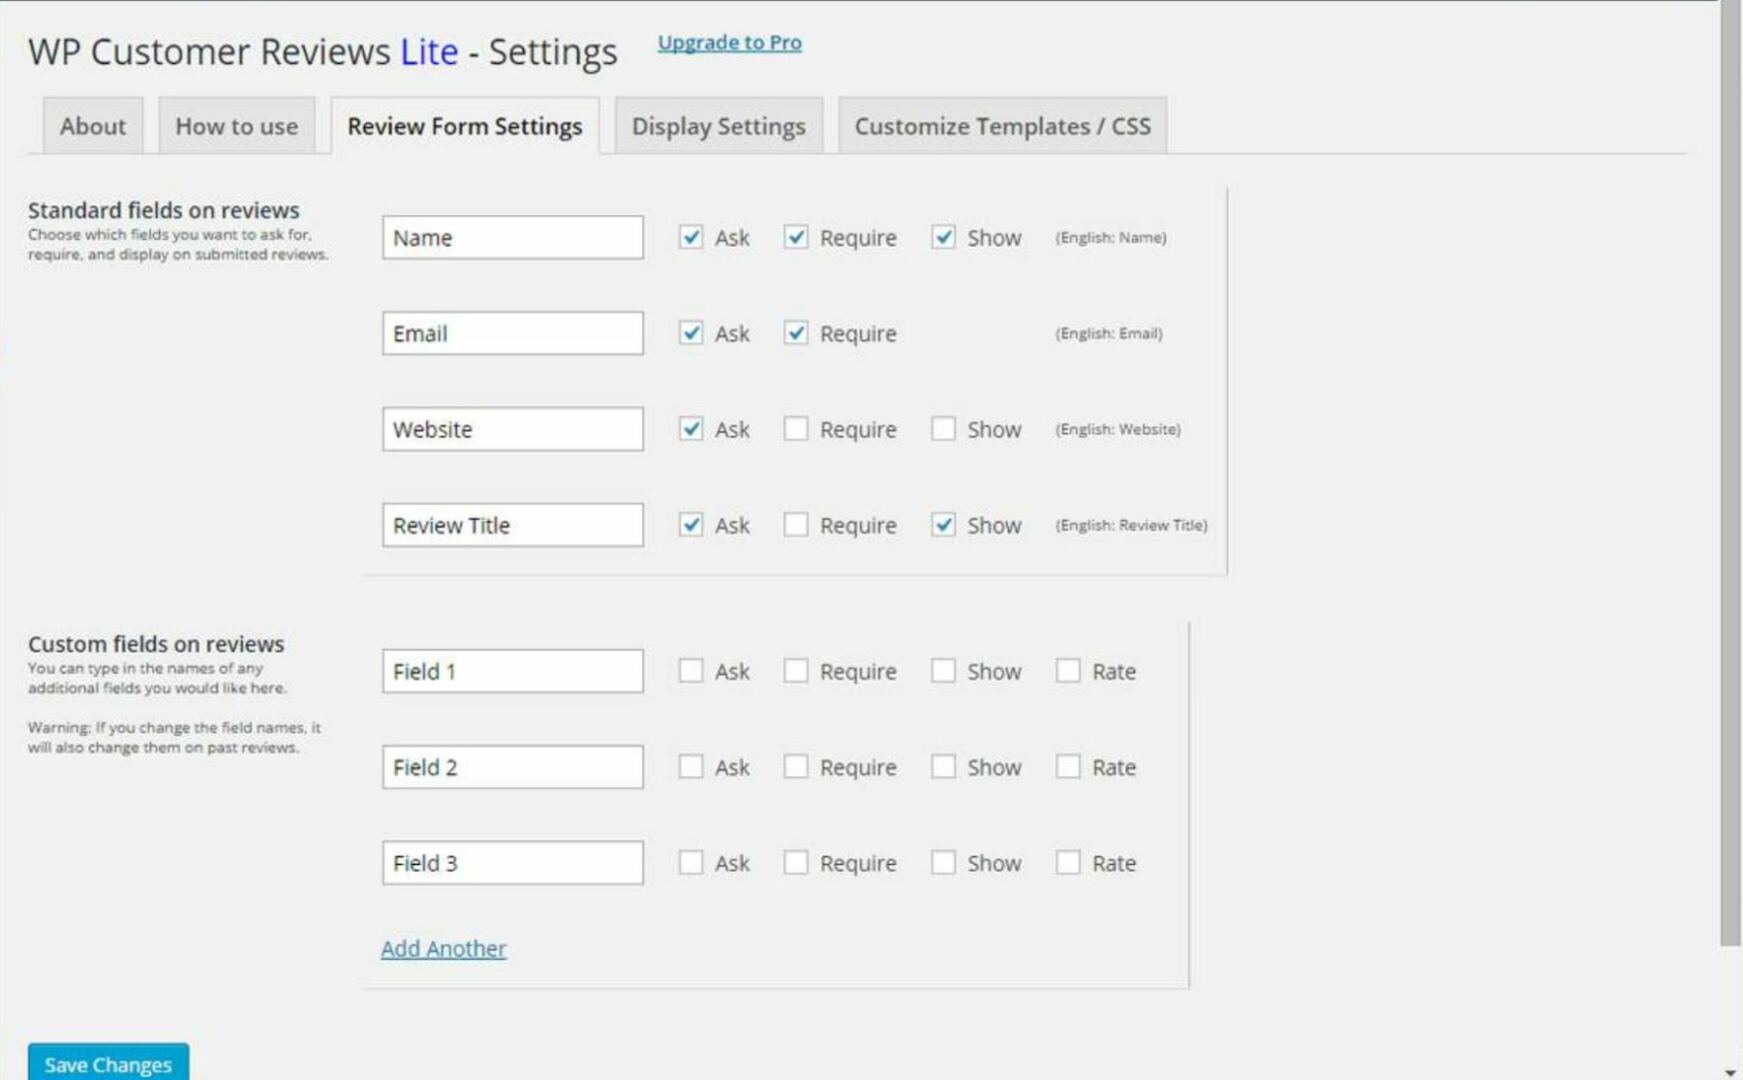 The form settings page of the WP Customer Reviews plugin.